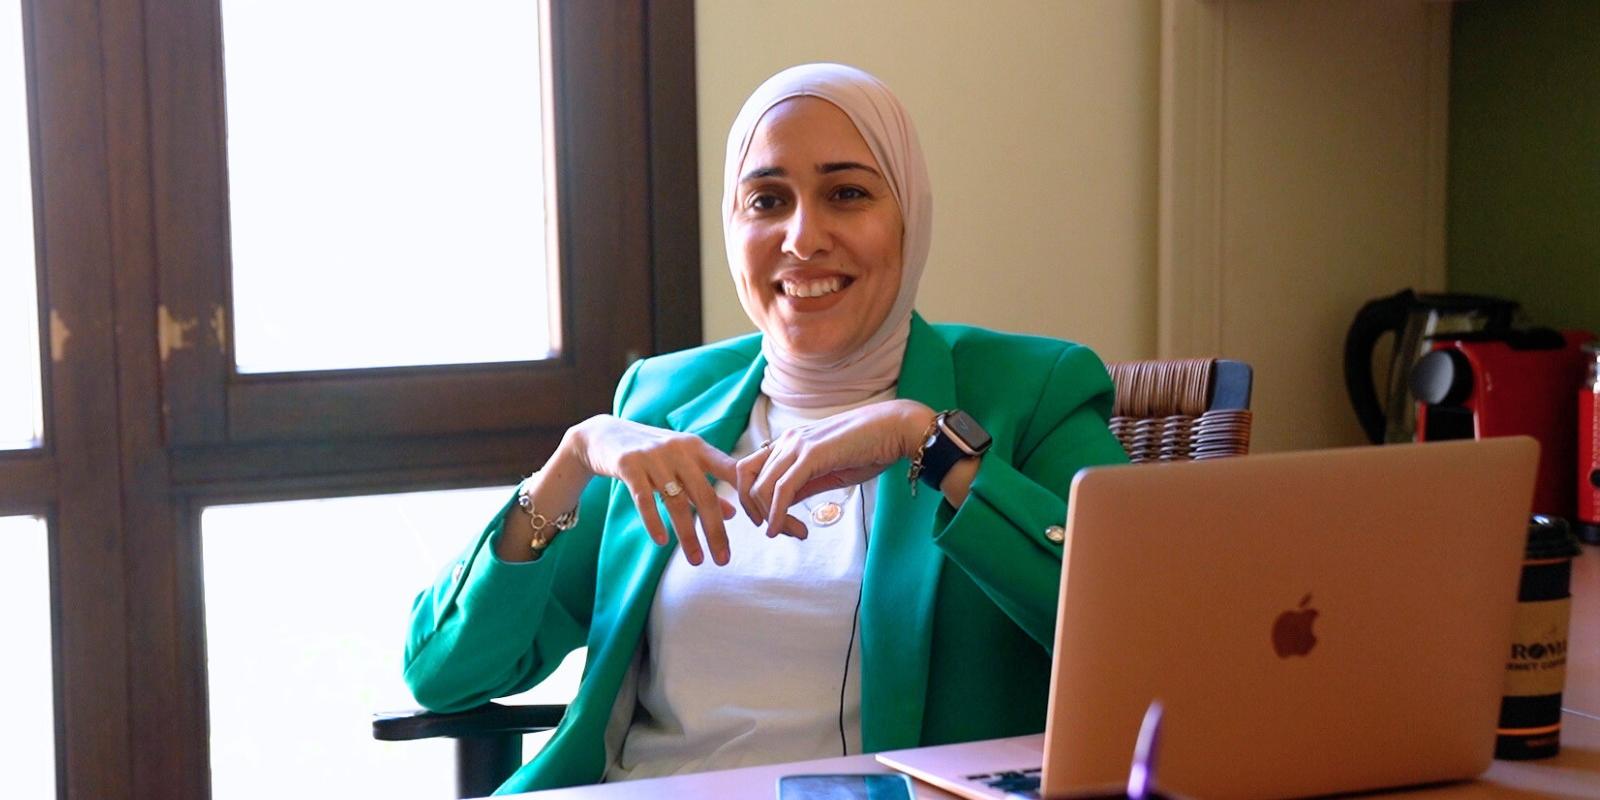 Woman in green jacket and white hijab sits at a desk smiling